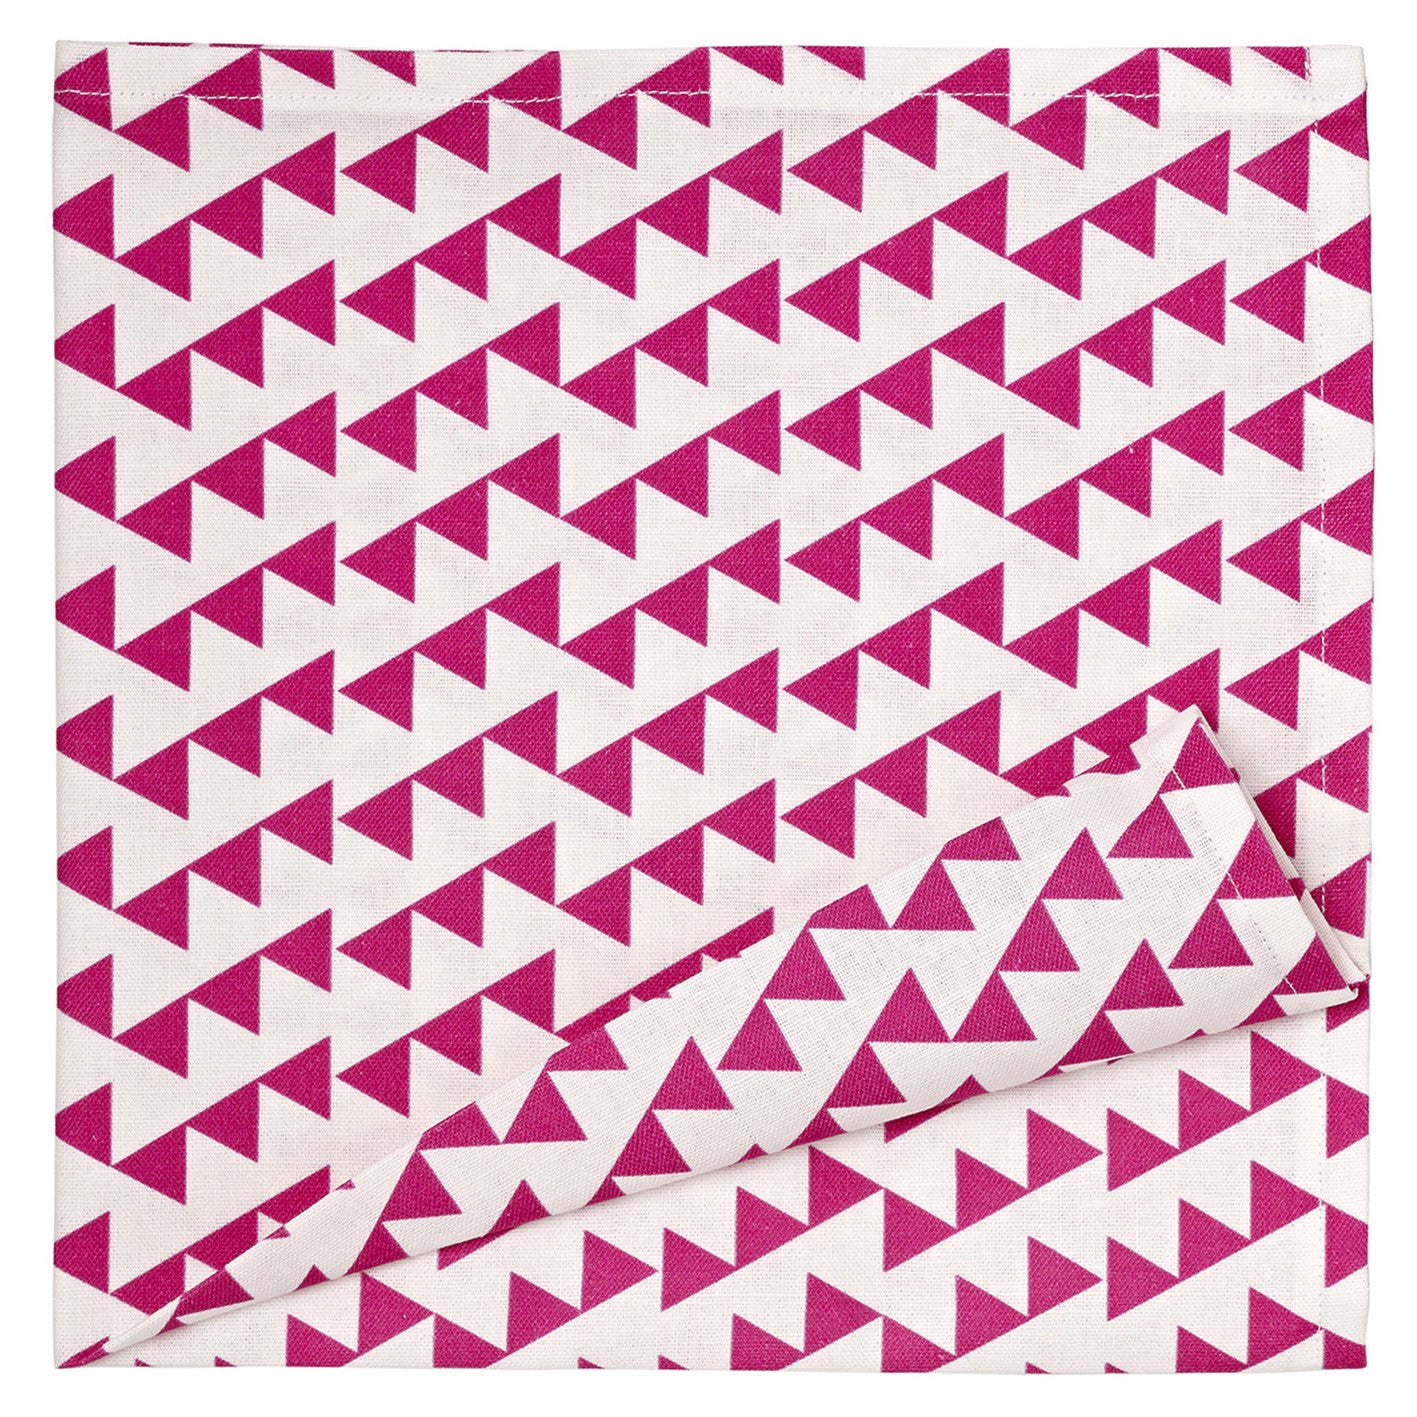 Bunting Geometric Pattern Linen Napkins in Bright Pink